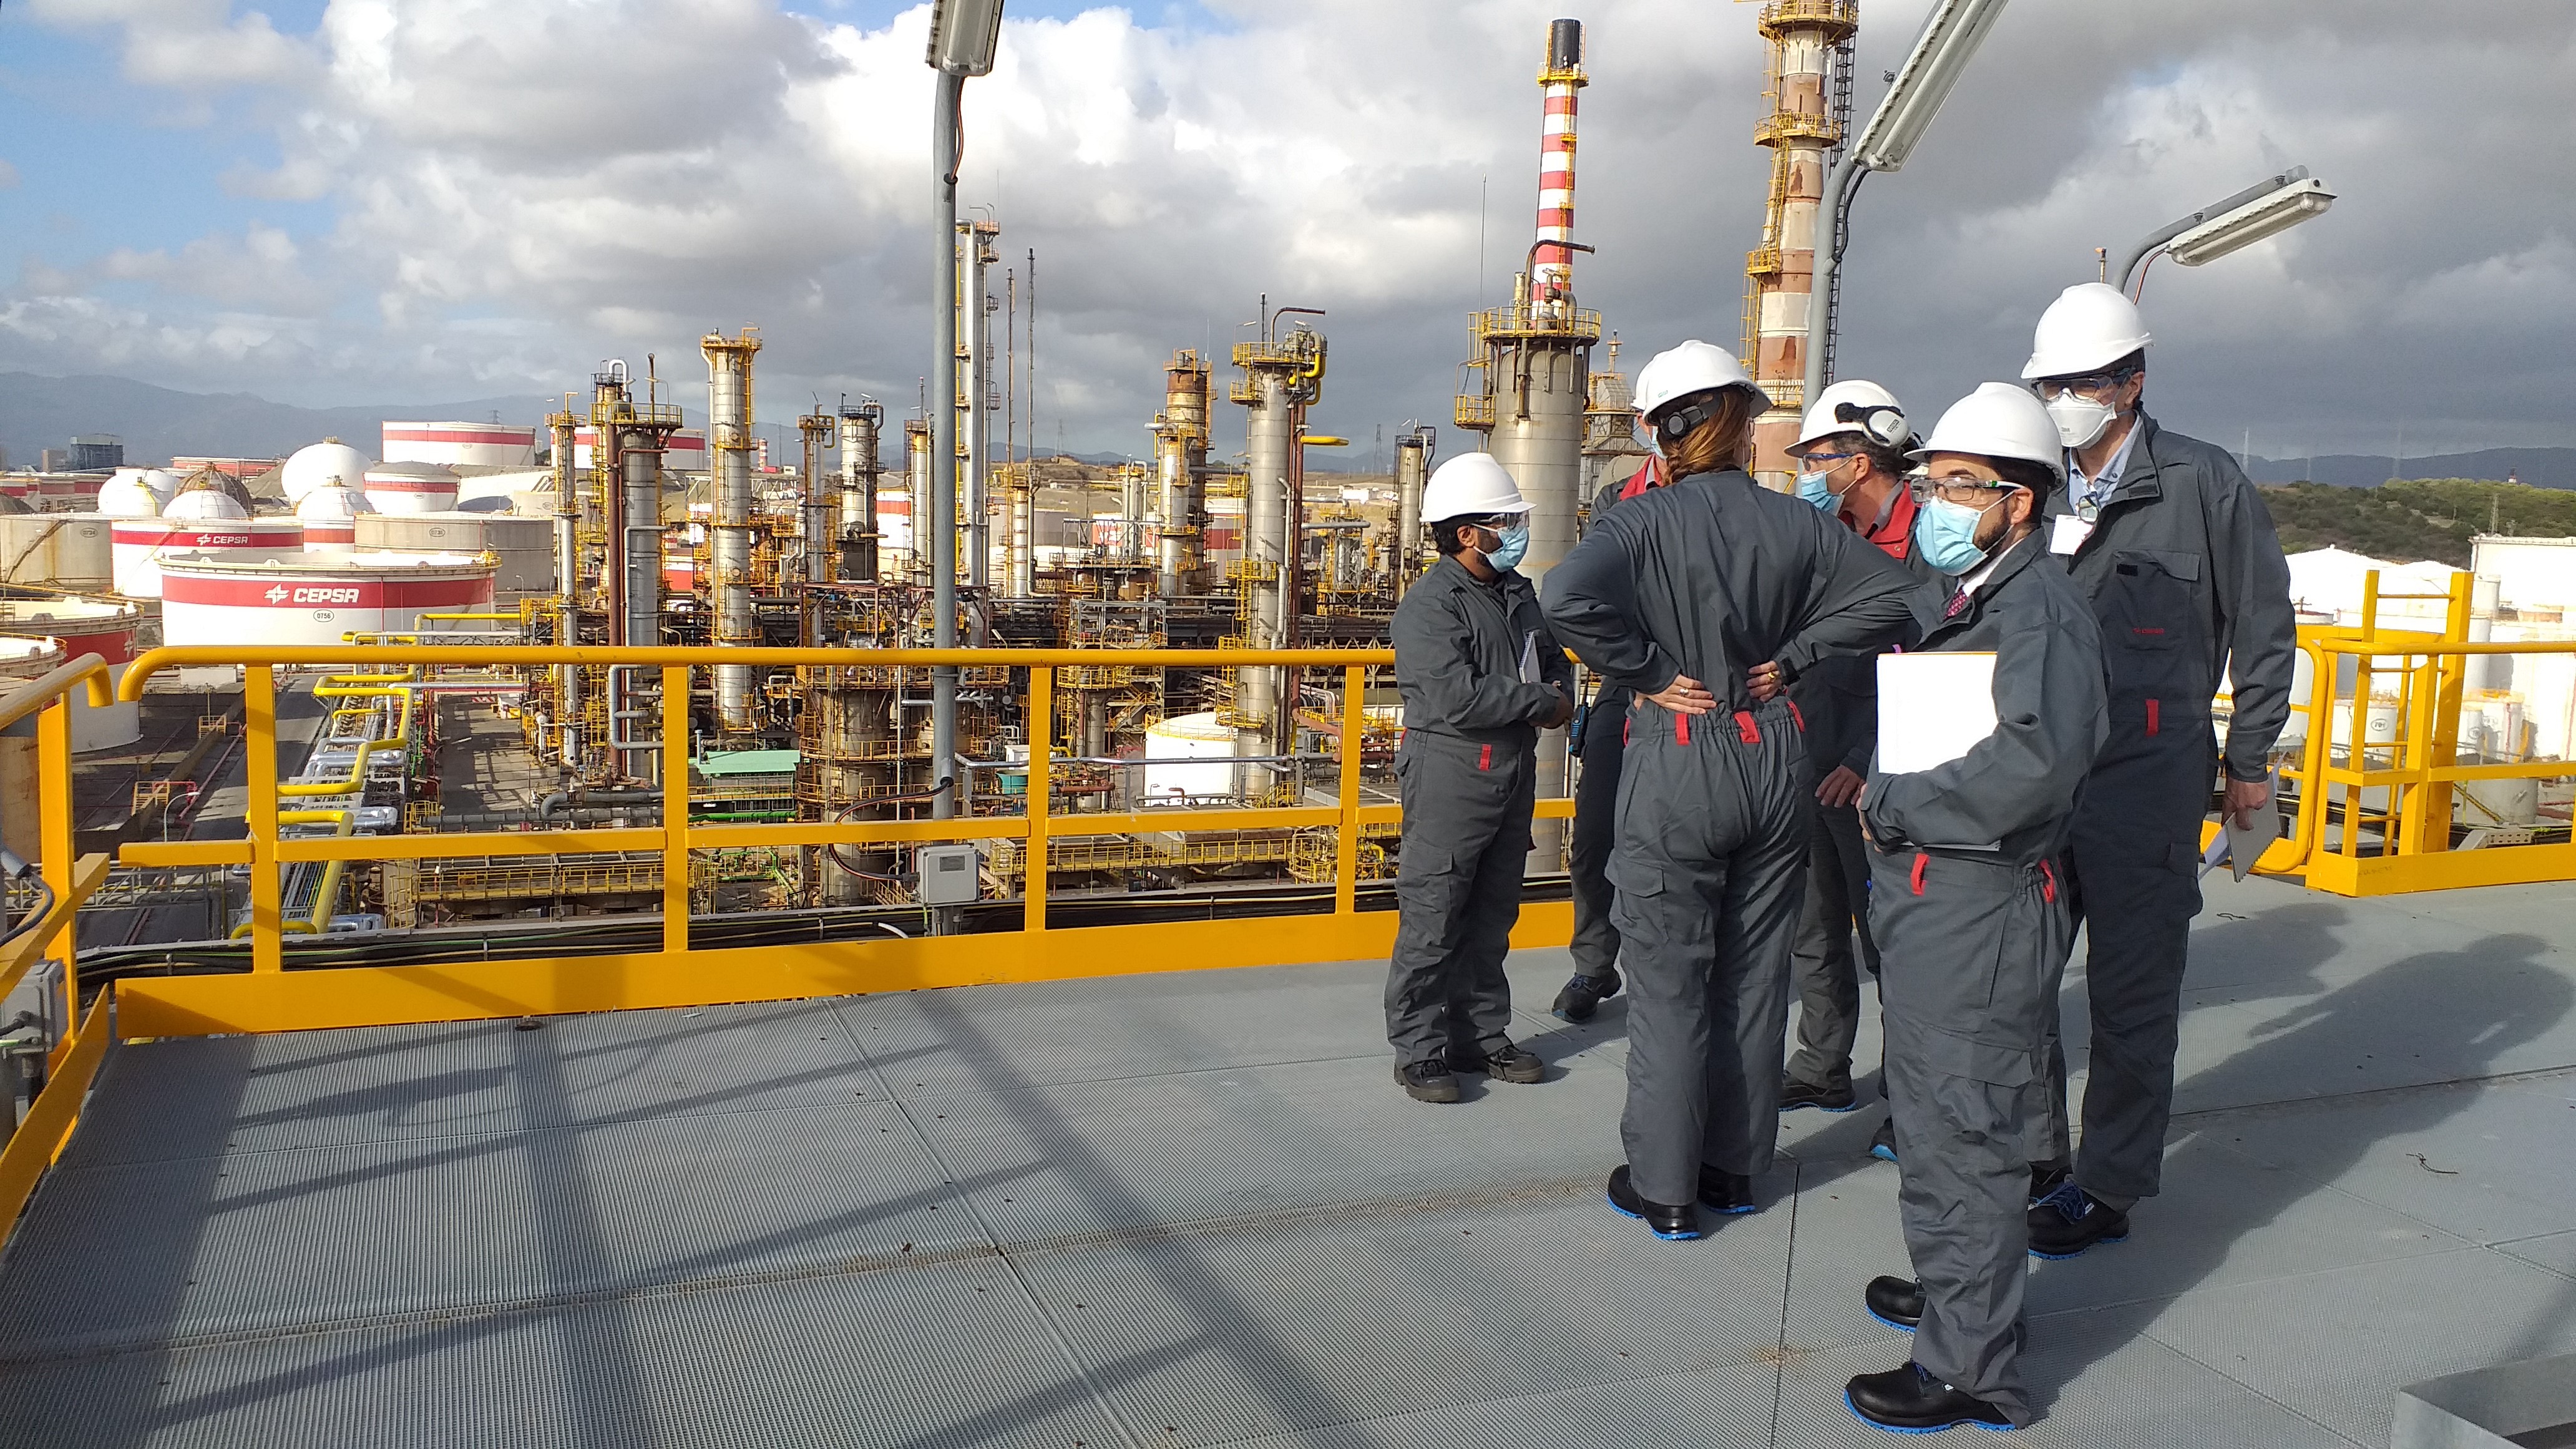 Inspecting a chemical plant in Cadiz